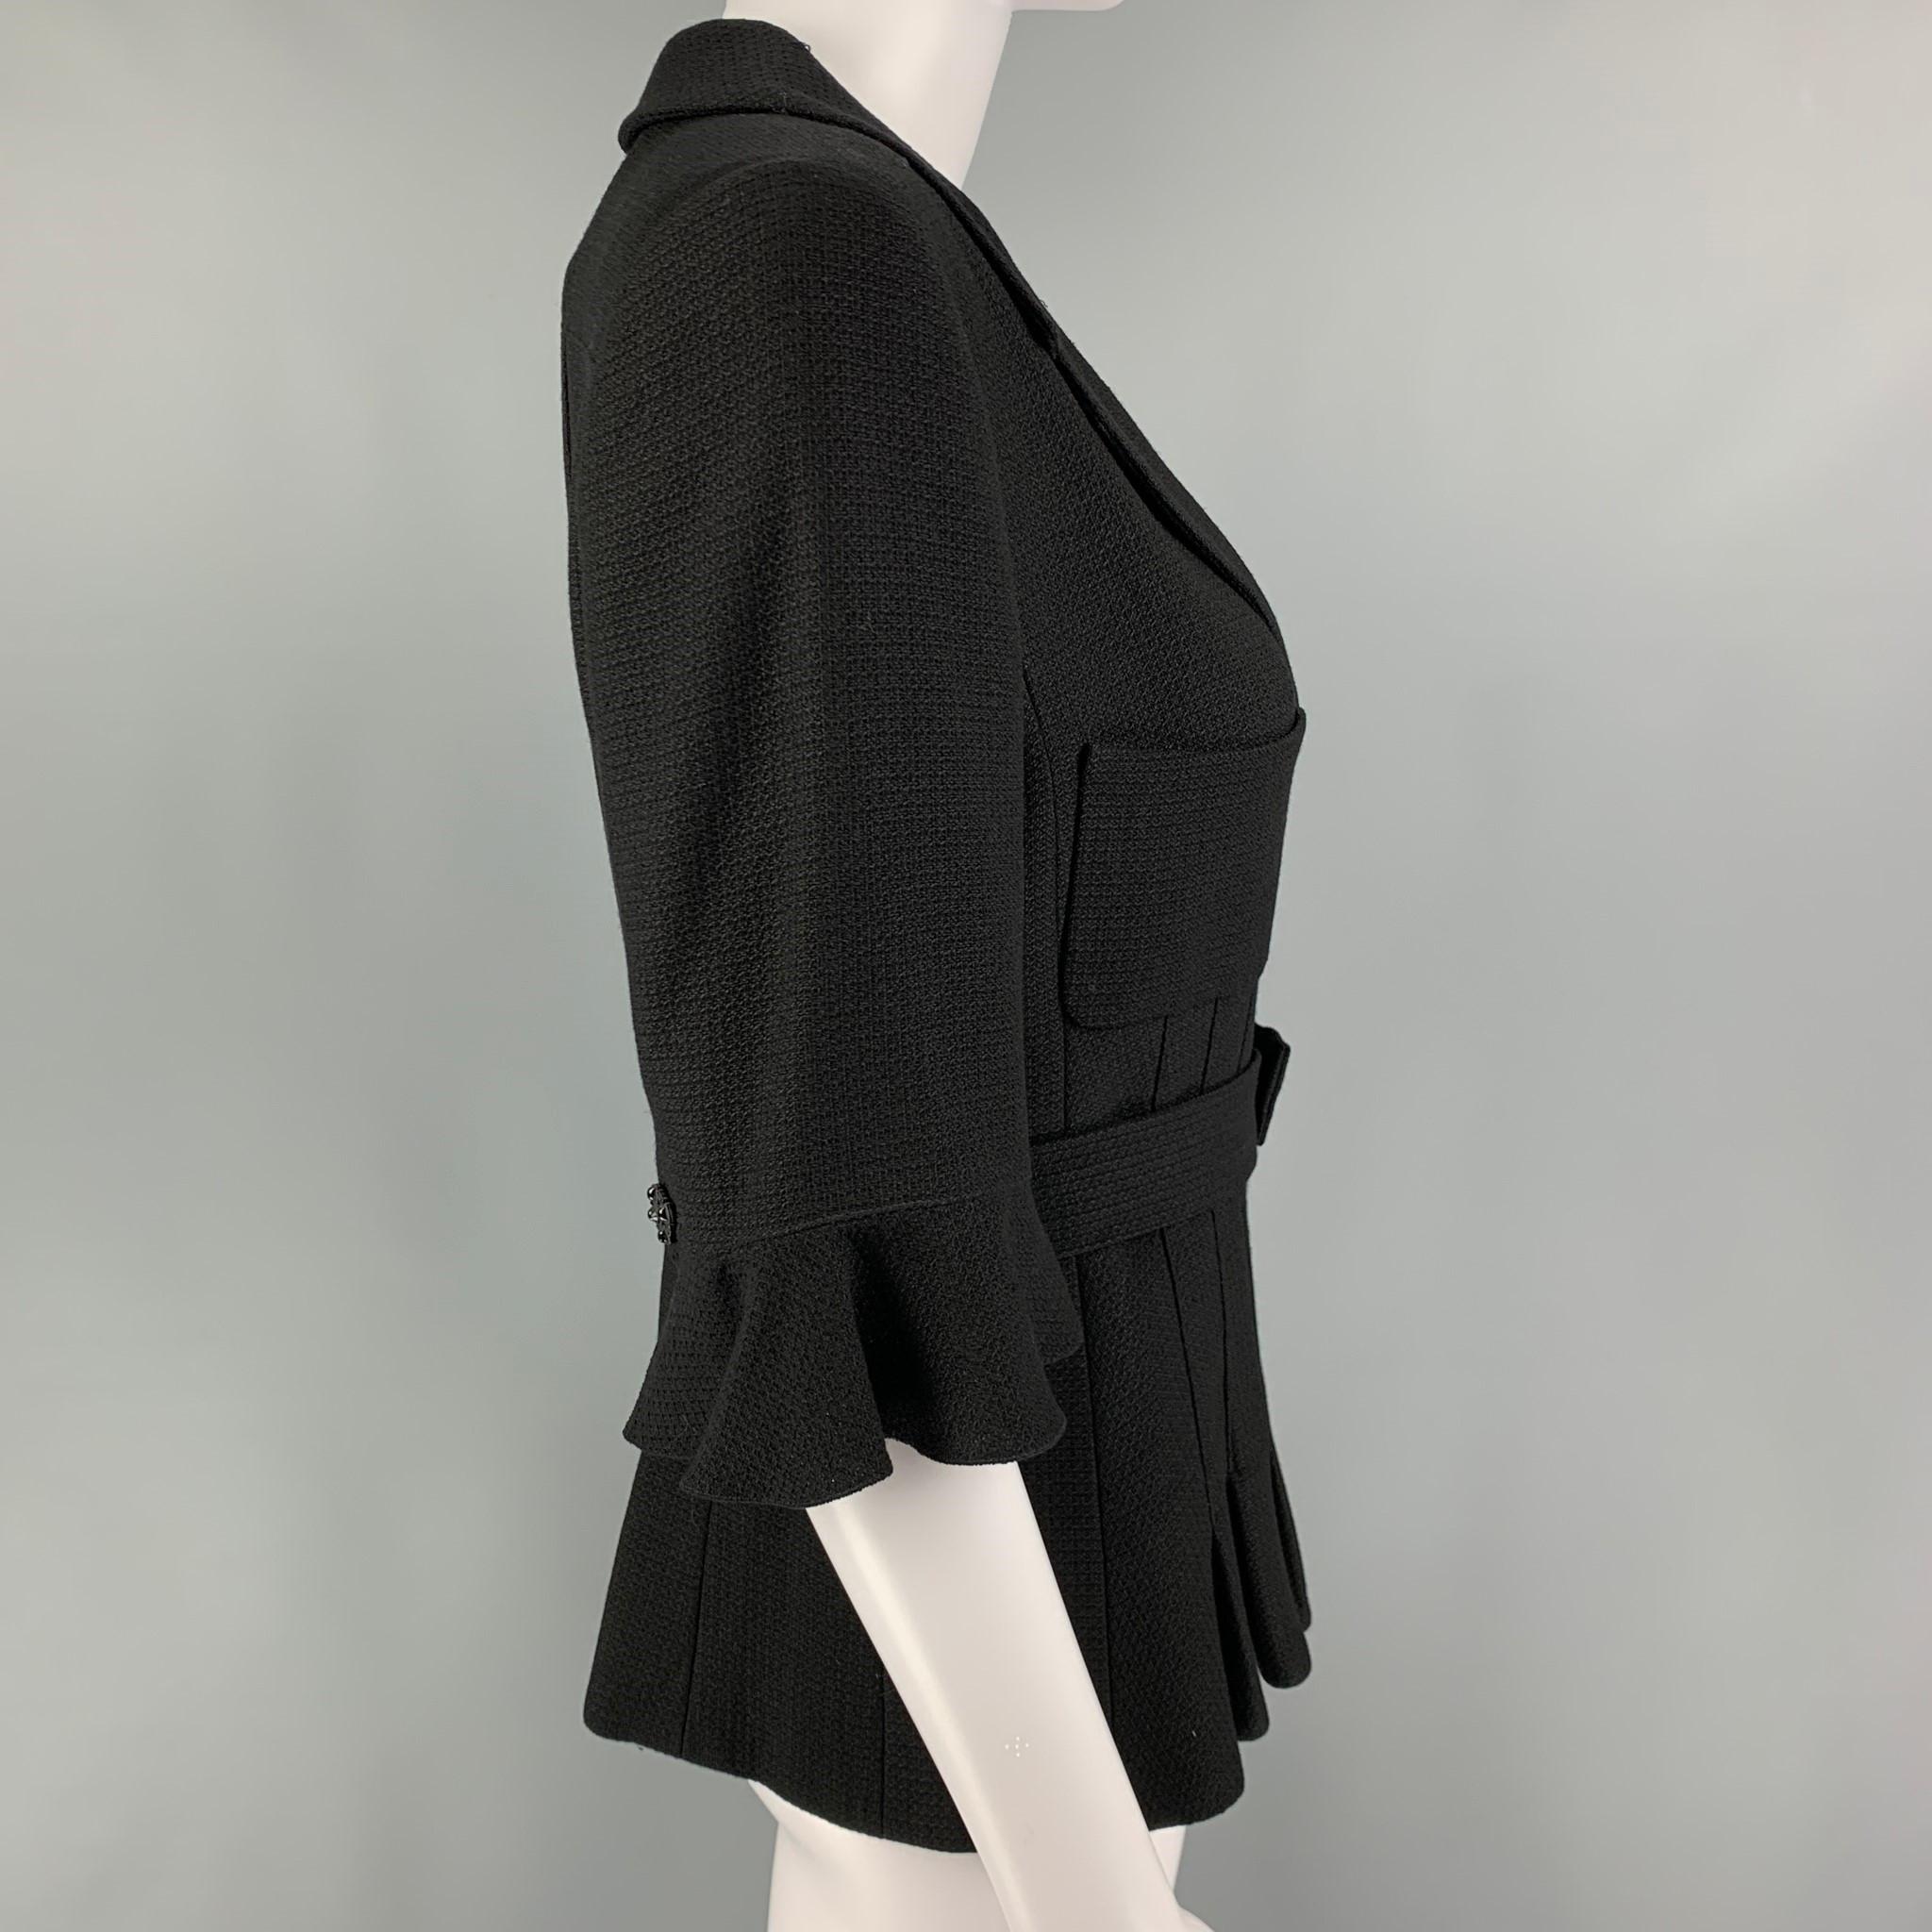 CHANEL jacket comes in a black textured wool blend with a full liner featuring a belted style, pleated hem, 2/4 sleeves, notch lapel, and a buttoned closure. 

Very Good Pre-Owned Condition.
Marked: 07C 94305 40

Measurements:

Shoulder: 15.5